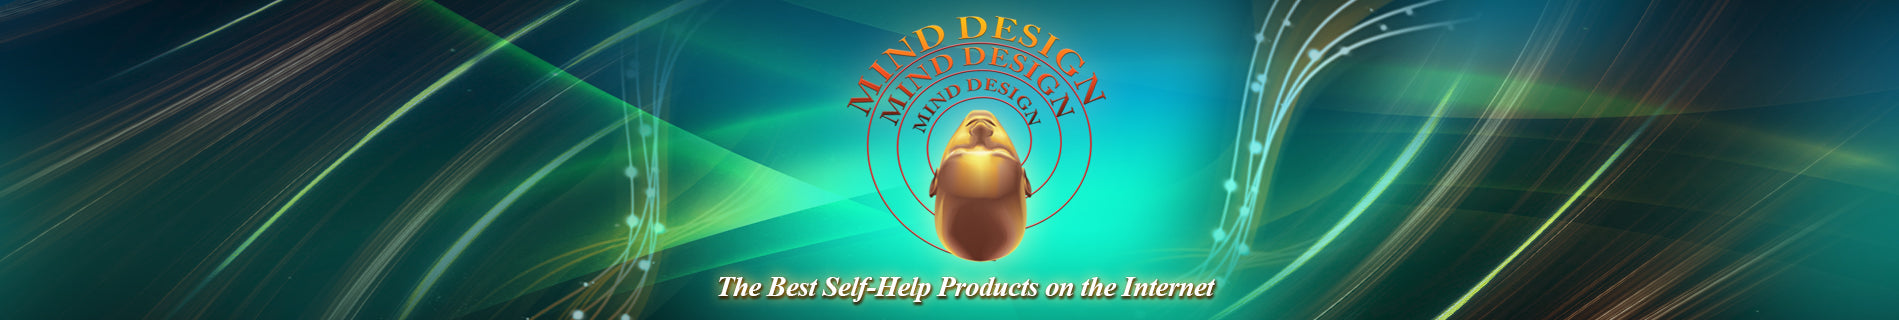 Mind Design Unlimited - The Best Self Help Products on the Internet